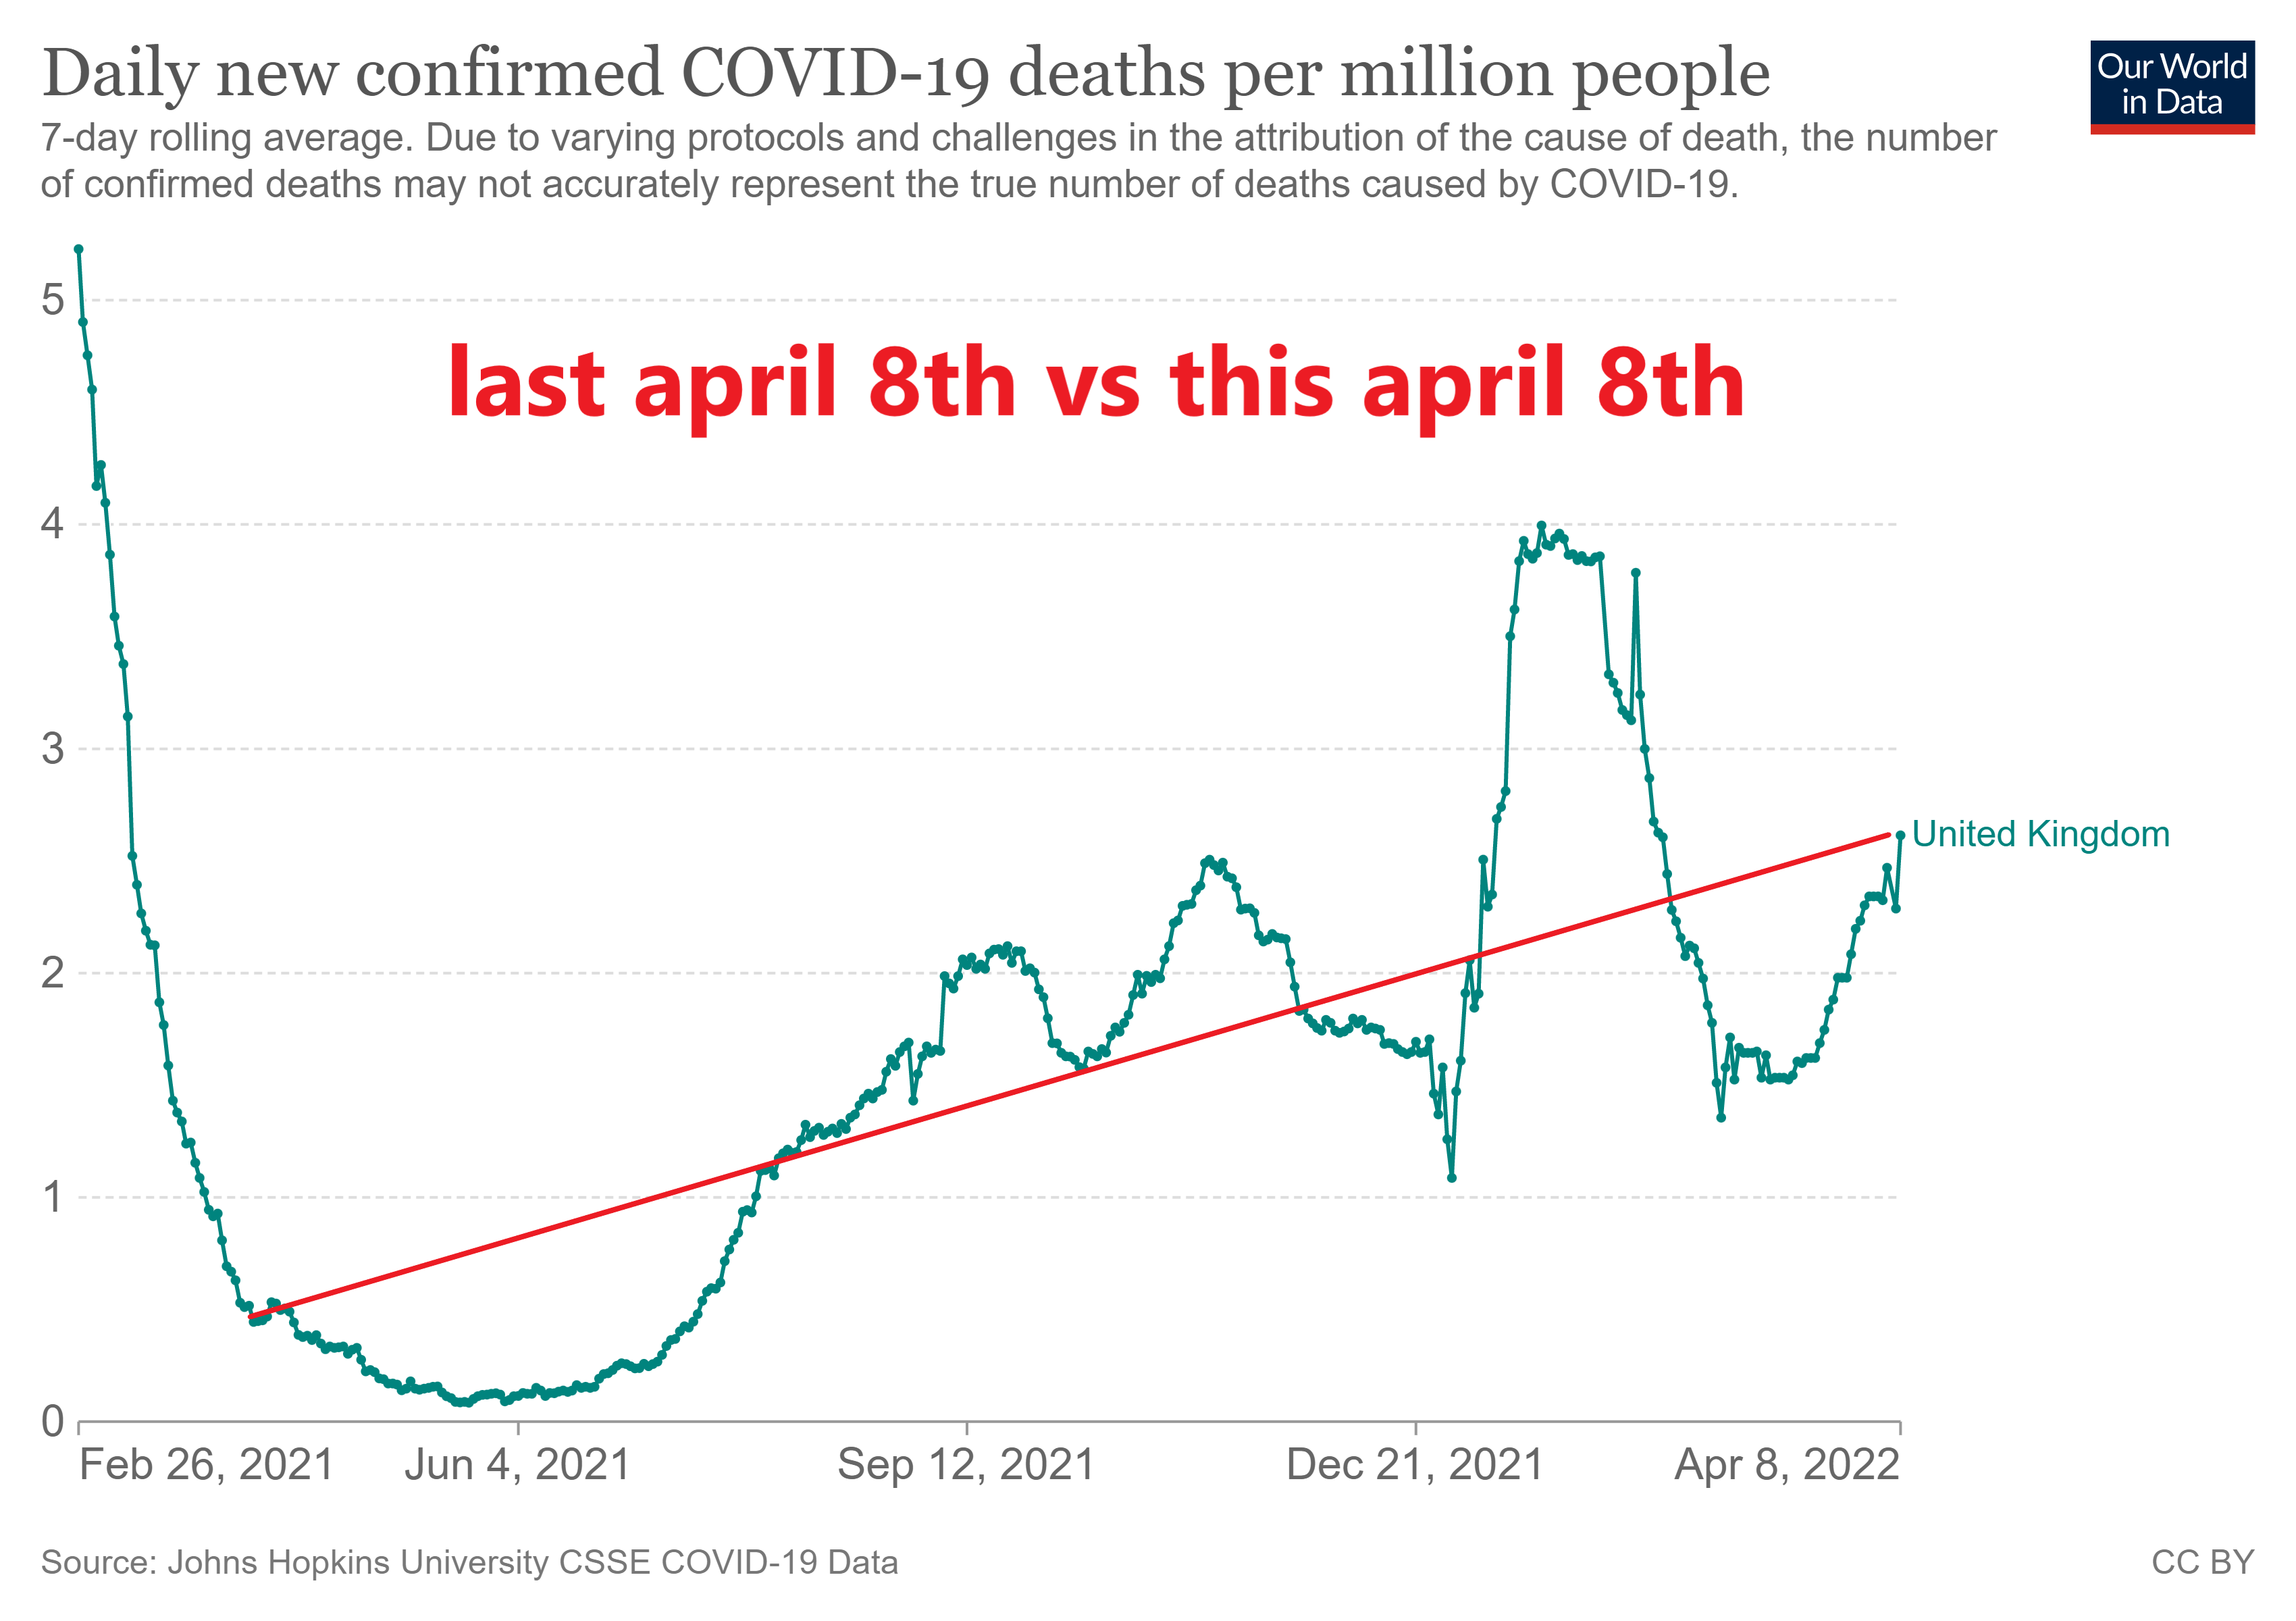 Daily new confirmed COVID-19 deaths per million people in UK